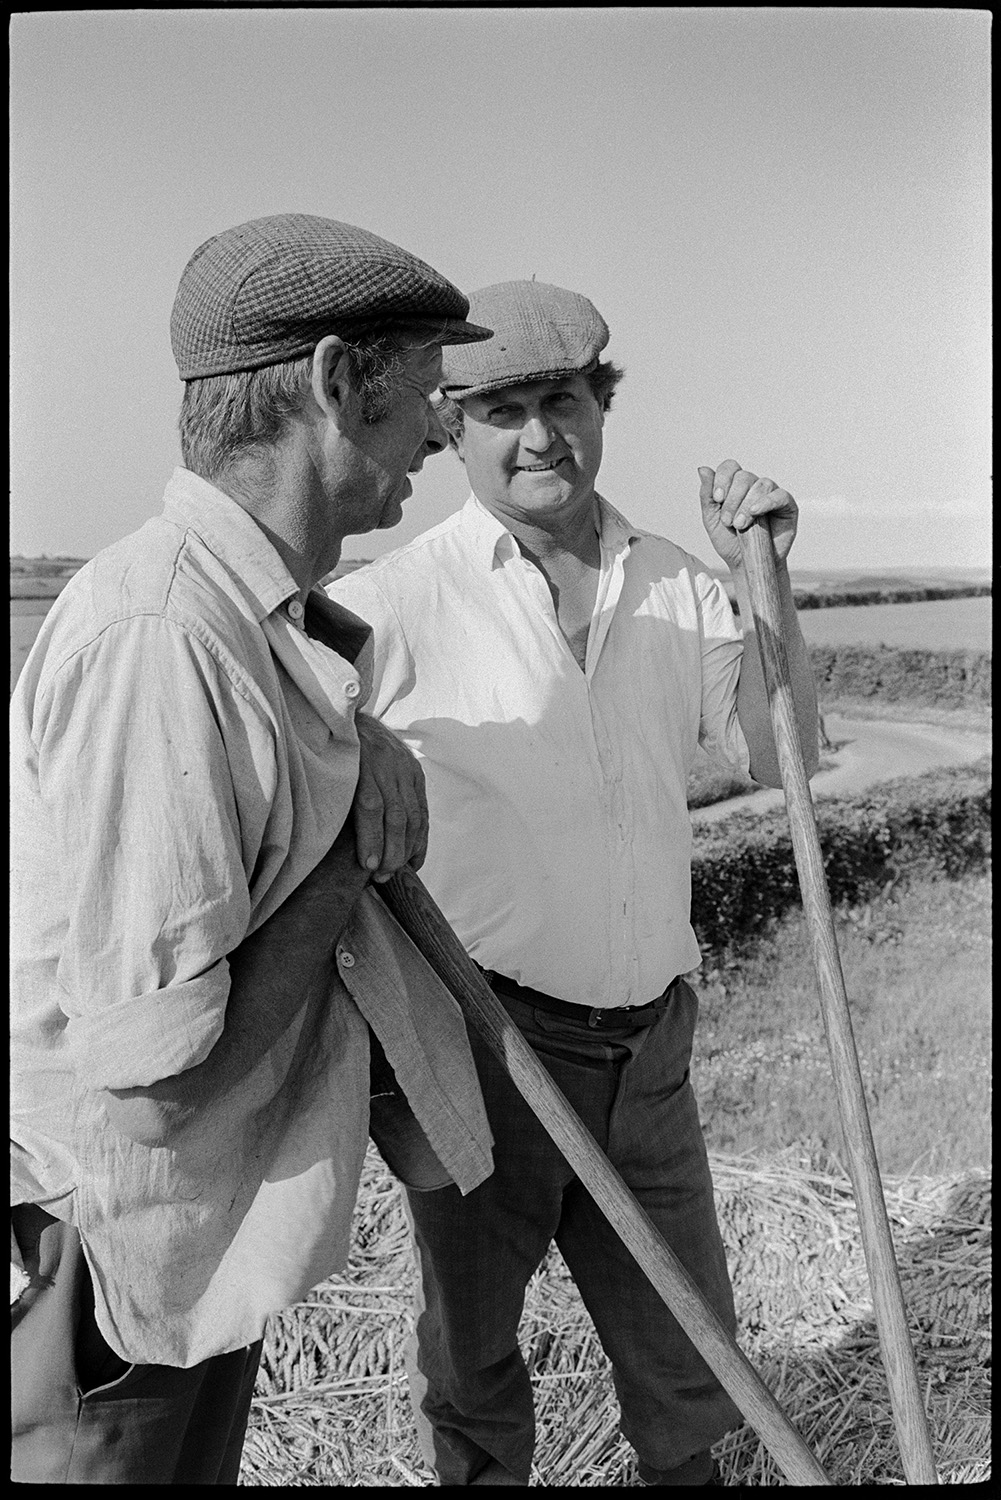 Two reedcombers resting and chatting, wearing caps.
[Two men reedcoming. They are wearing caps and leaning on their pitchforks chatting in the bright sunshine at Westacott, Riddlecombe.]